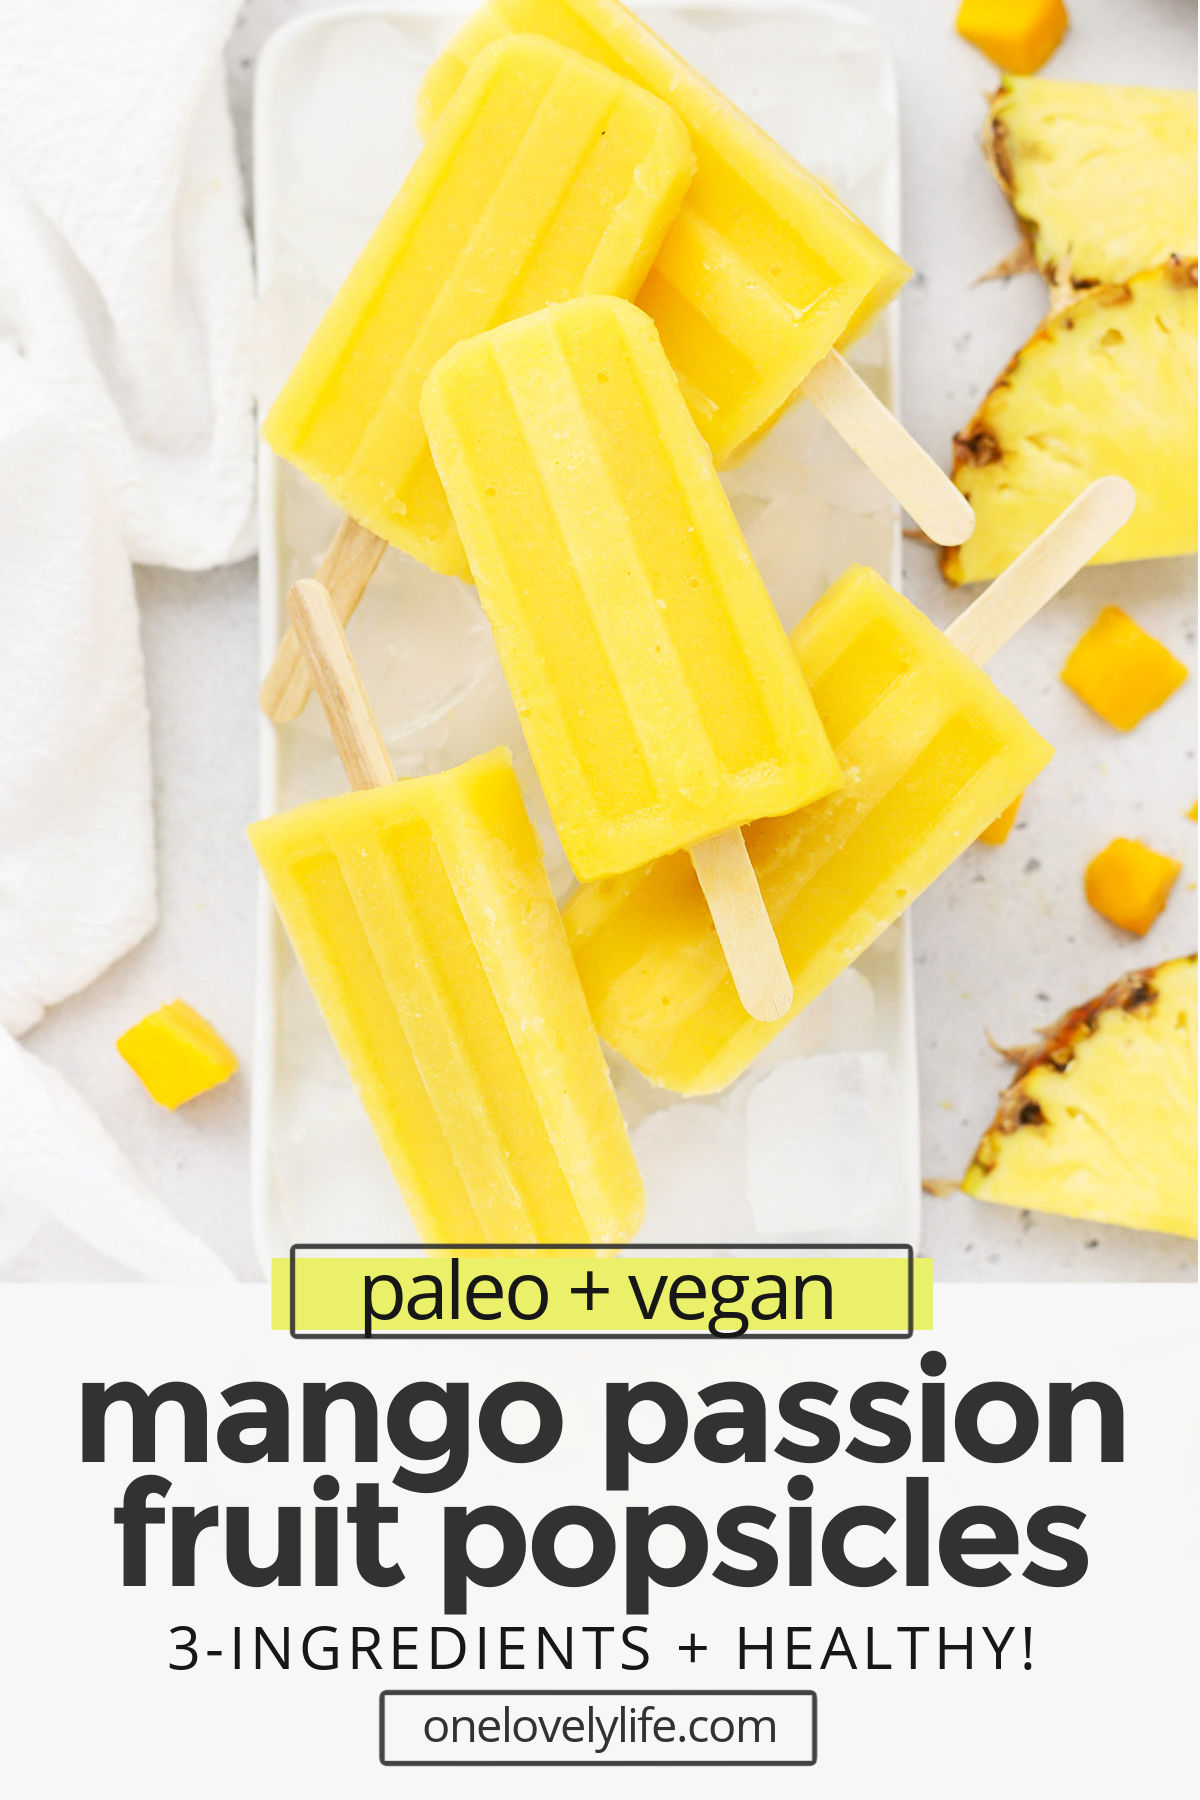 Mango Passion Fruit Popsicles - These refreshing mango popsicles taste like a tropical vacation! They're perfect healthy popsicles for a hot day. (Paleo, Vegan) // Mango Passionfruit Popsicles // Paleo popsicles // fruit popsicles // tropical popsicles // vegan popsicles // yellow popsicles